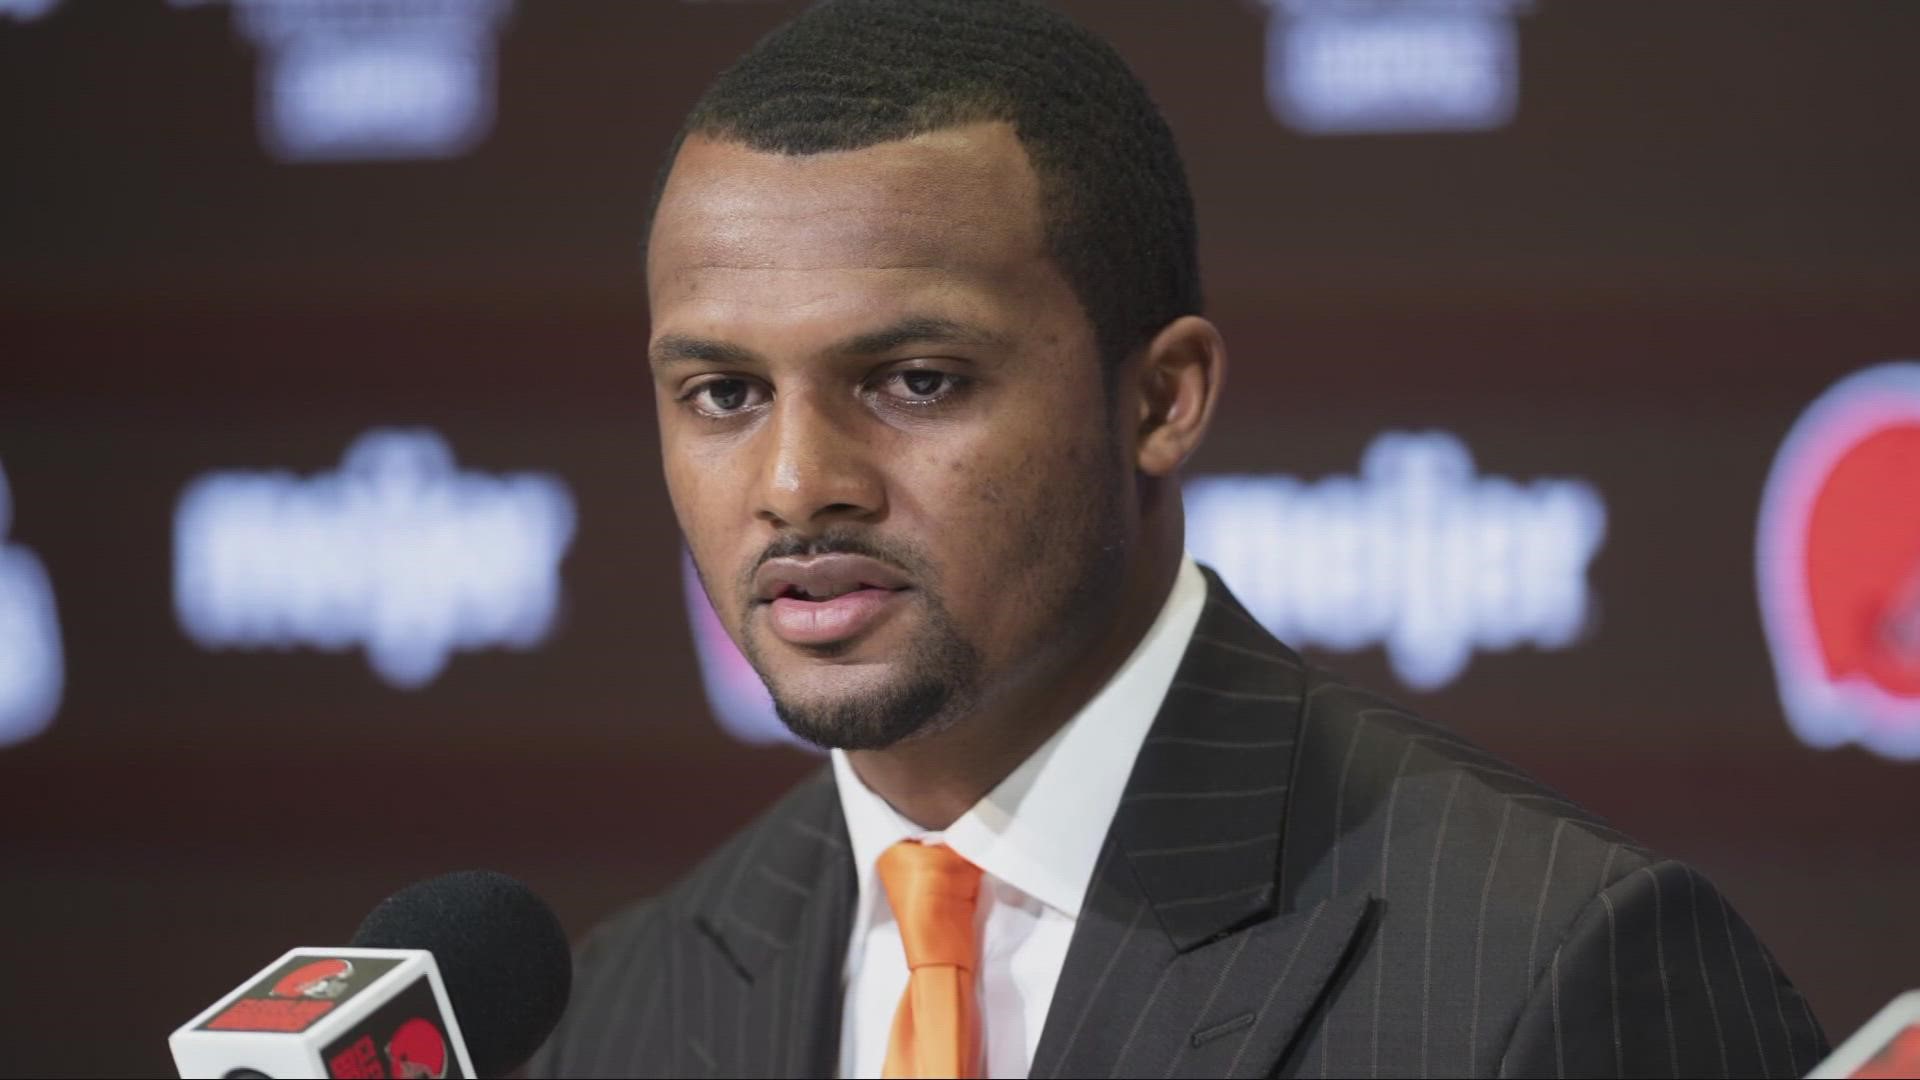 3News' Jim Donovan gives the latest updates on the situation regarding the disciplinary hearing for Cleveland Browns QB Deshaun Watson.